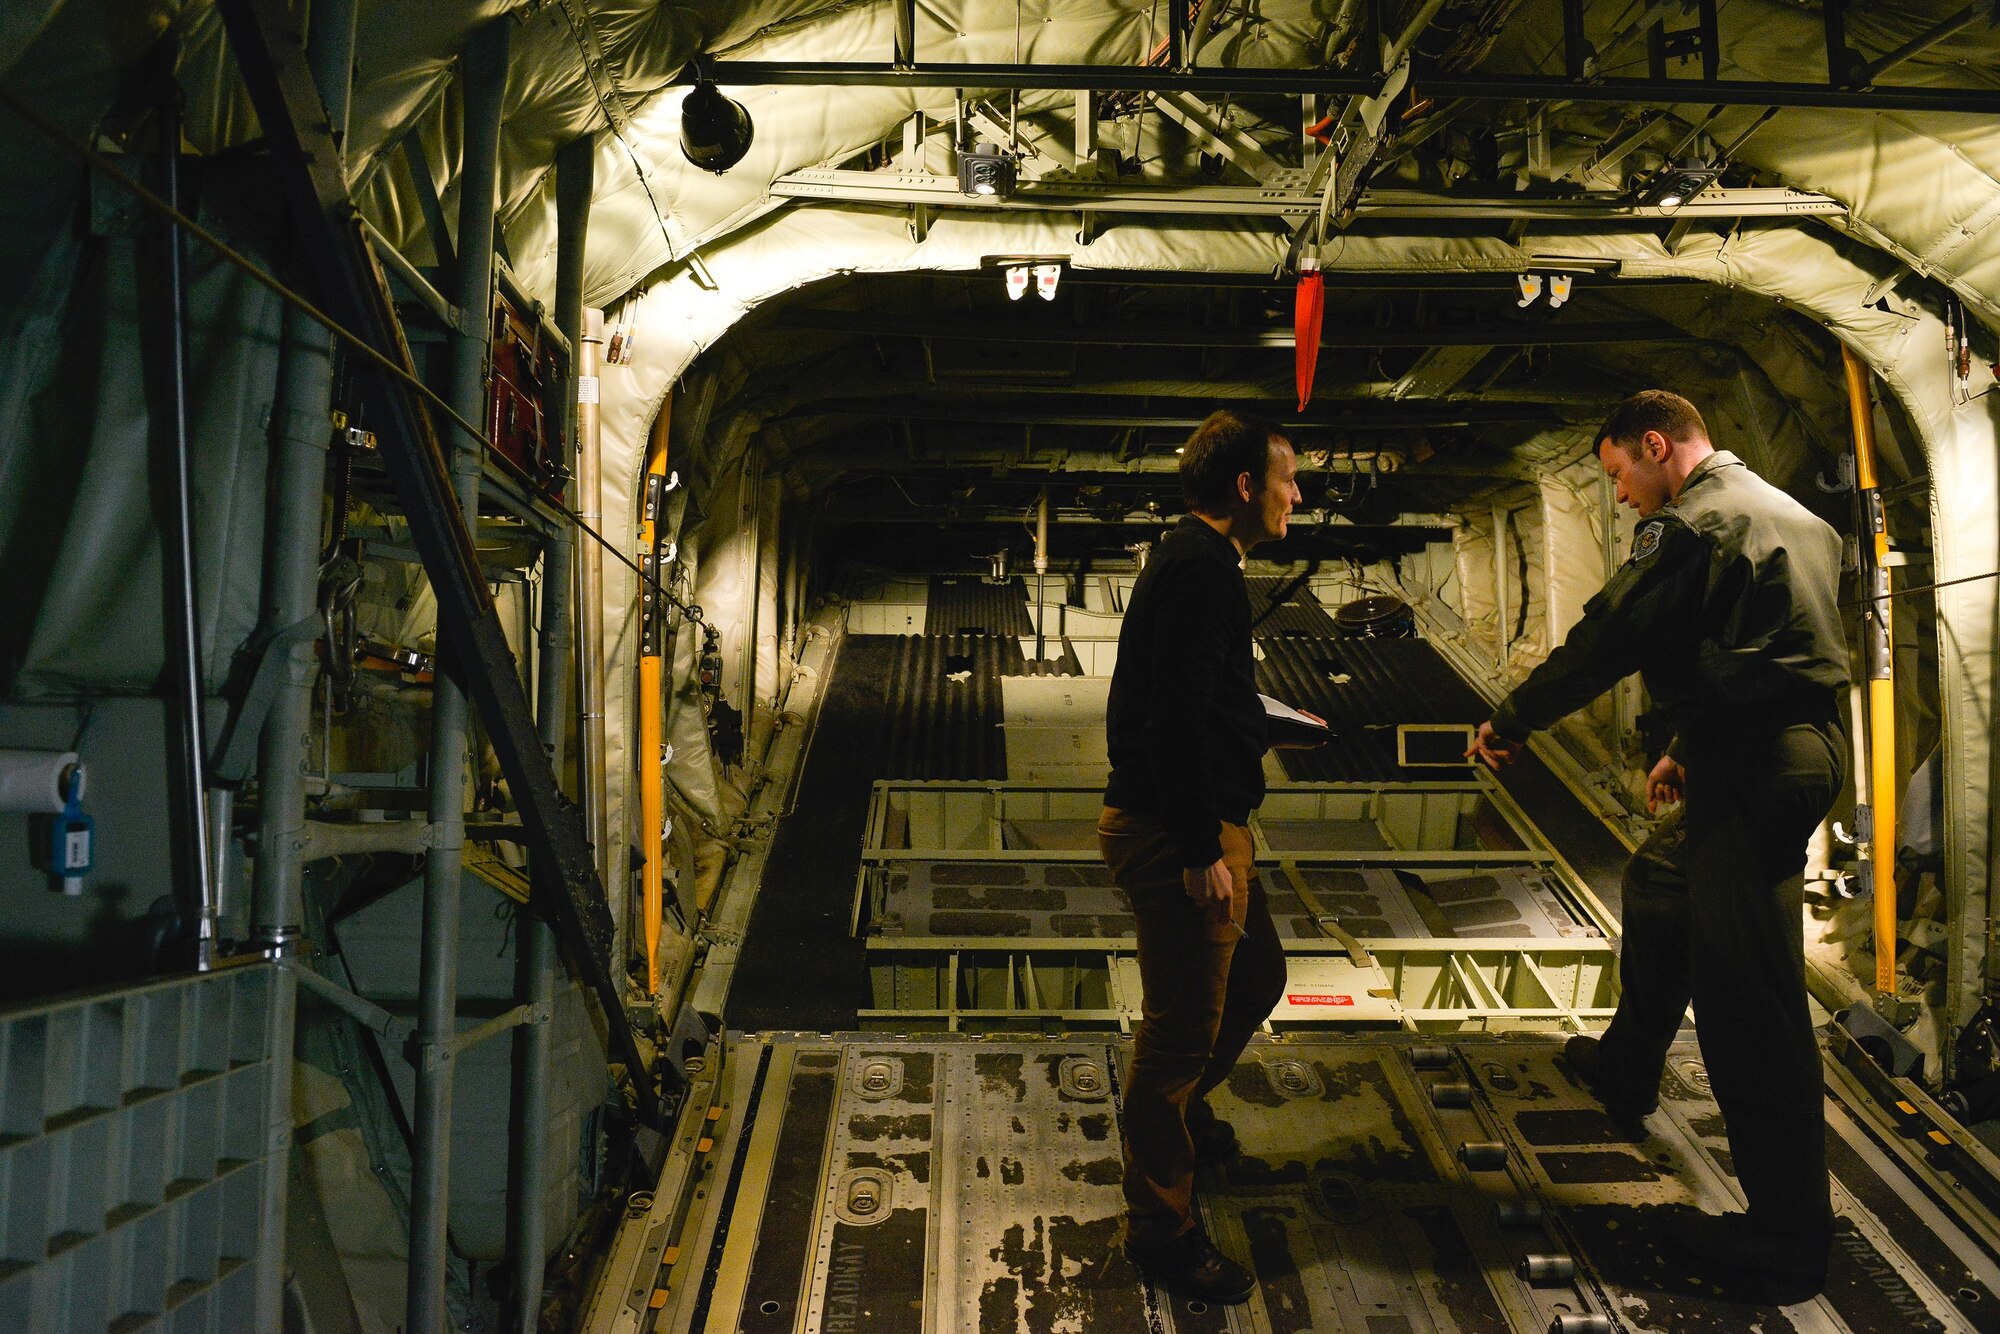 Tech. Sgt. James Moenning, 37th Airlift Squadron evaluator loadmaster, discusses the operations of a C-130J Super Hercules ramp with Pierre Yves, a French military contractor April 28, 2016, at Ramstein Air Base, Germany. The French air force recently purchased several C-130s and visited the 37th Airlift Squadron to survey the aircraft in order to better understand its features and capabilities. U.S. Air Force Photo/ Airman 1st Class Lane Plummer)